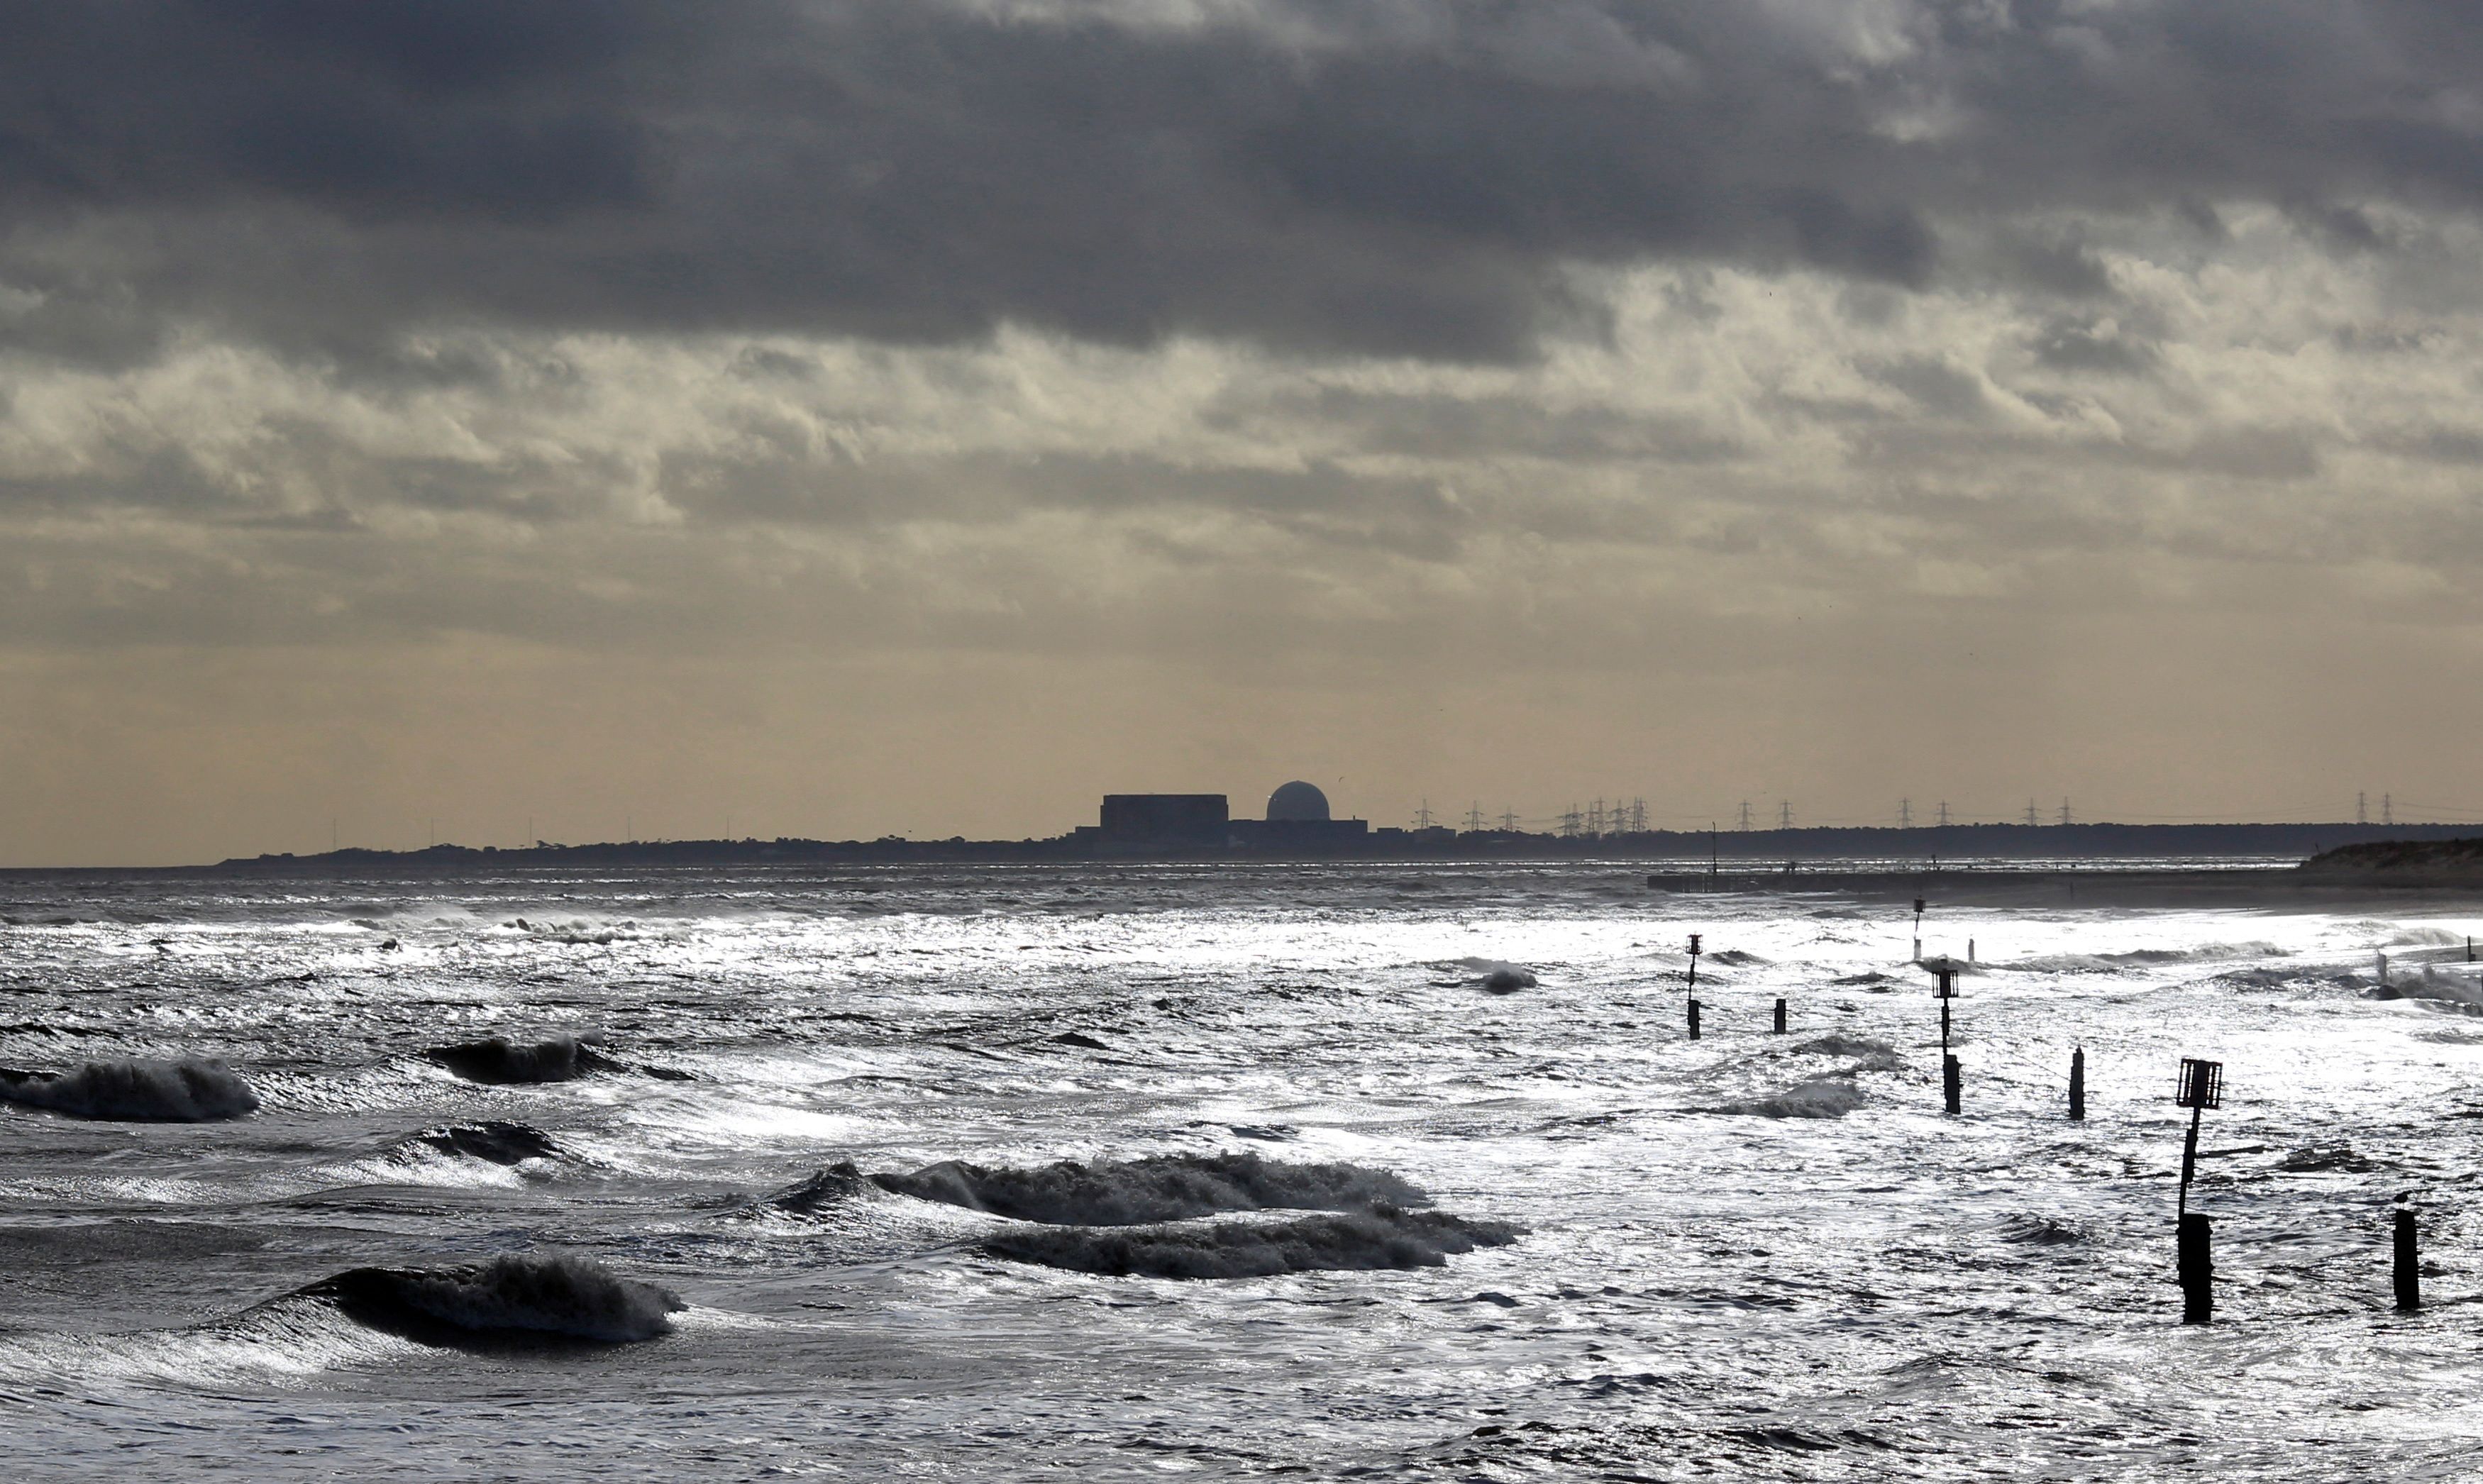 The nuclear reactor at Britain's Sizewell B nuclear power plant in Suffolk is seen during stormy weather